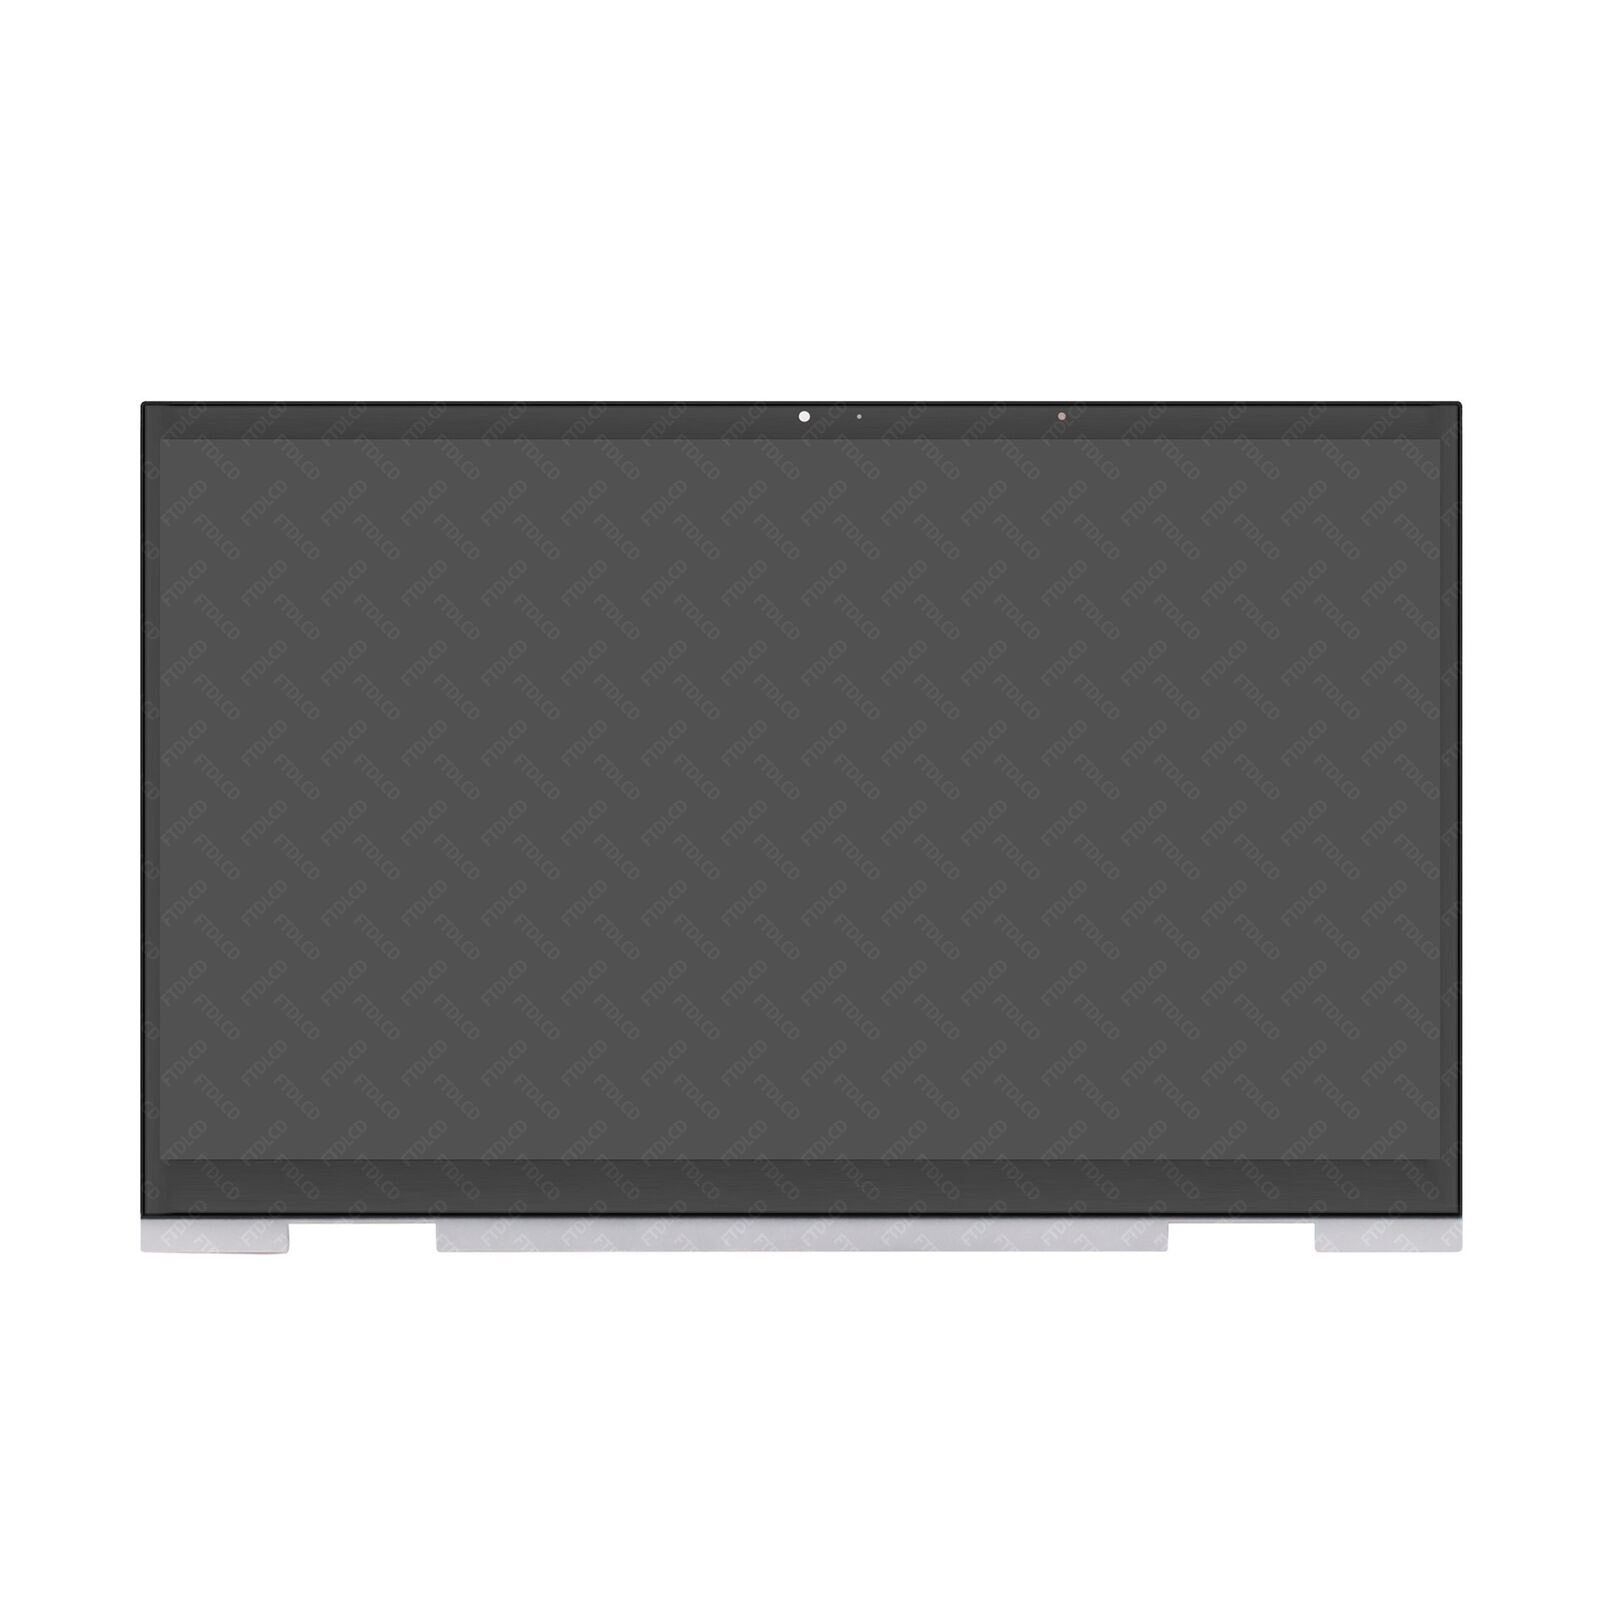 M45453-001 FHD LCD Touch Screen Digitizer Assembly for HP ENVY X360 15M-ES0013DX